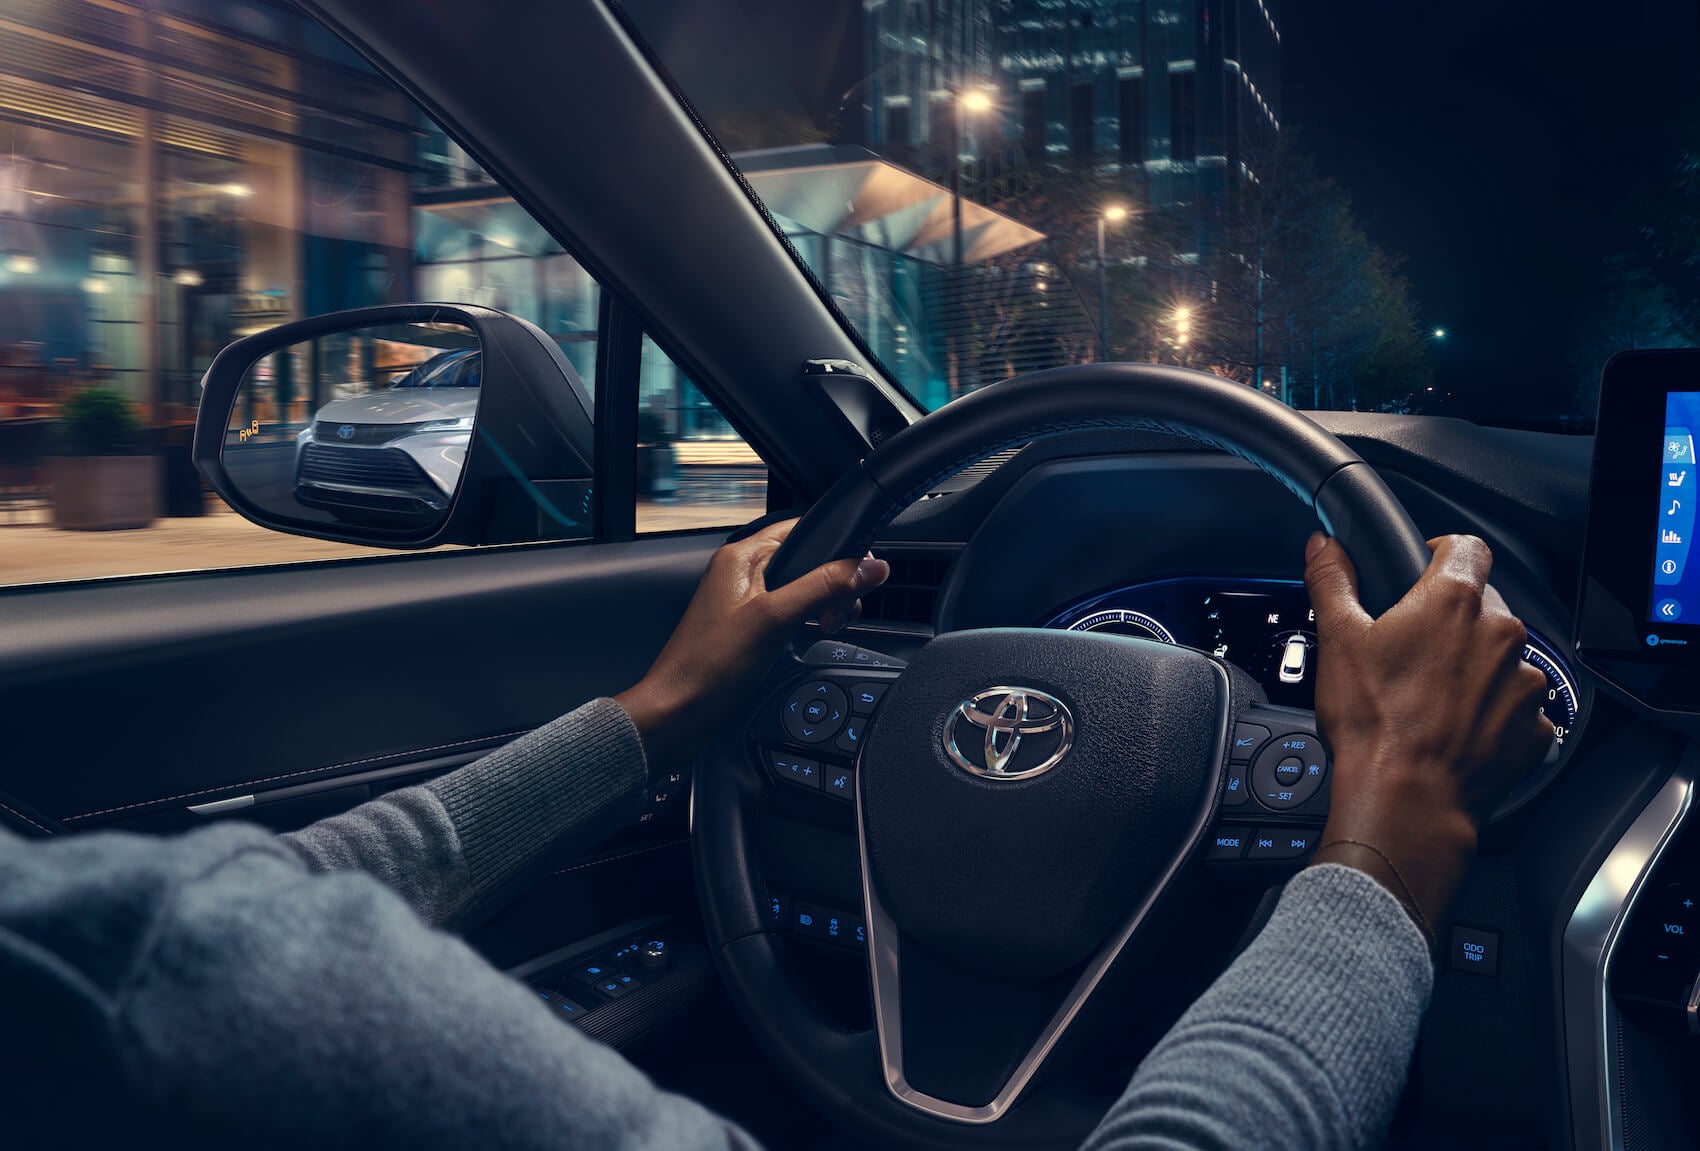 2021 Toyota Venza safety and technology